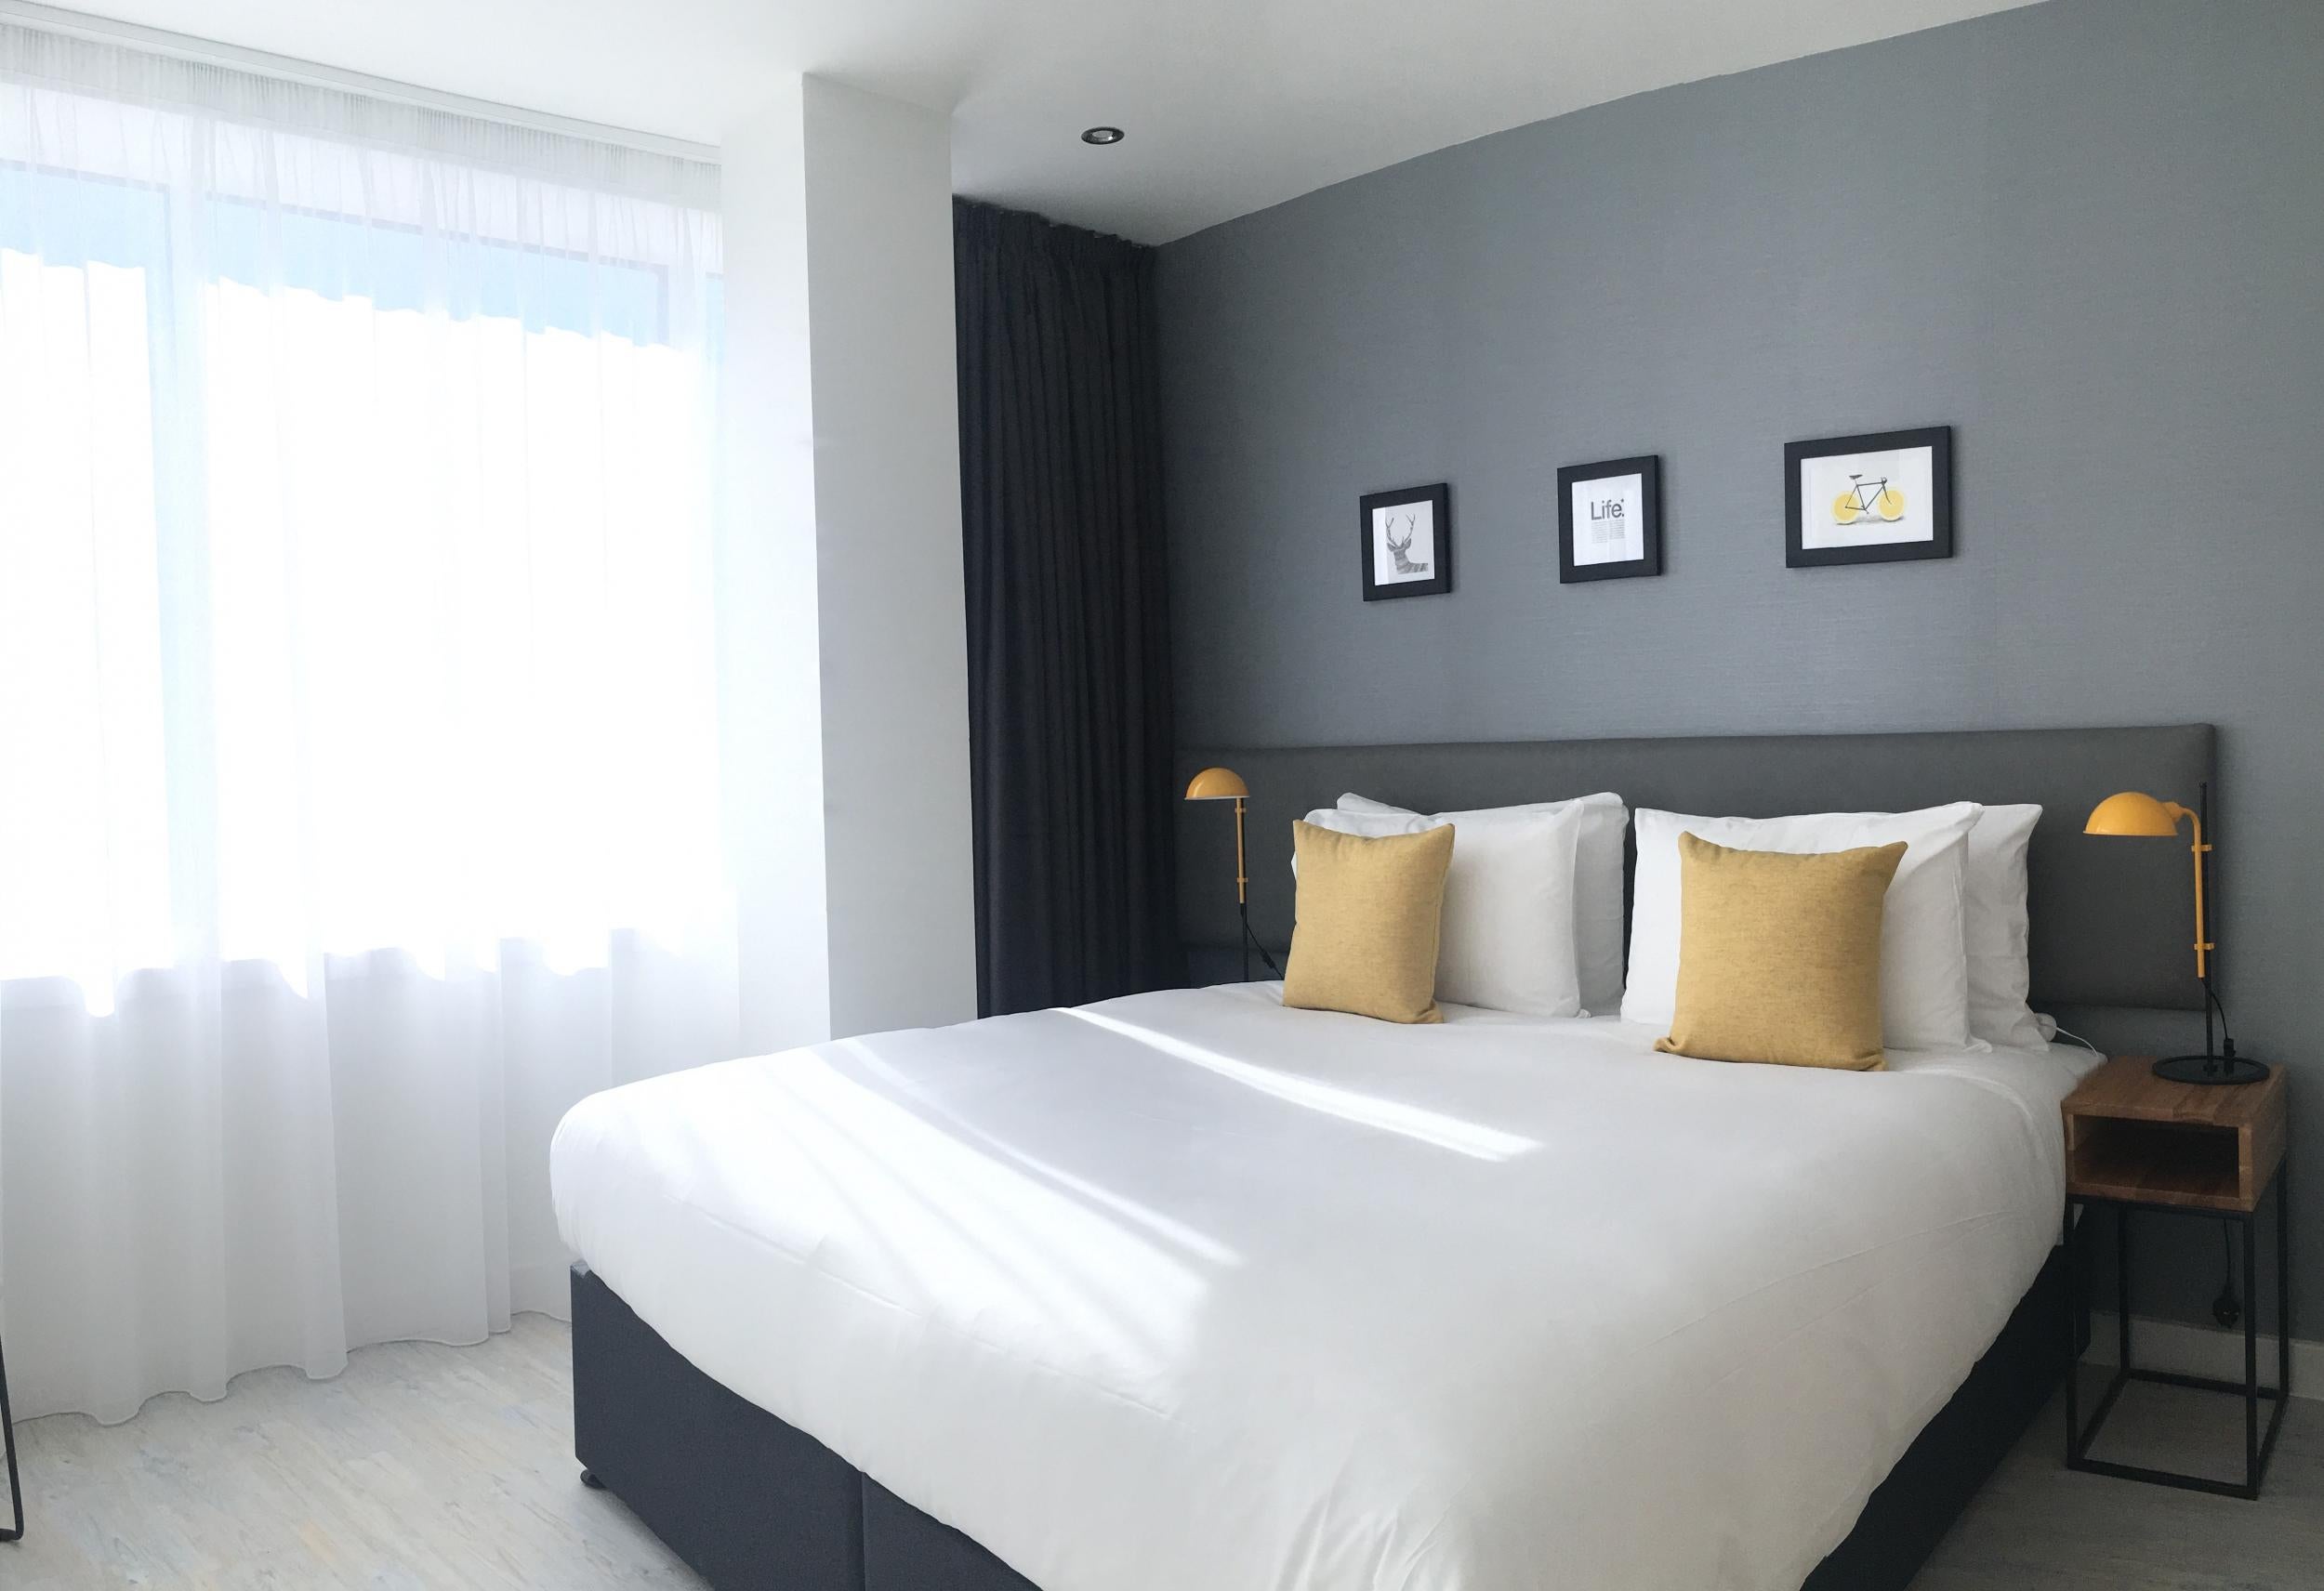 Located next to Piccadilly railway station, Staycity Aparthotels Manchester Piccadilly is an ideal choice for those travelling to the city by train